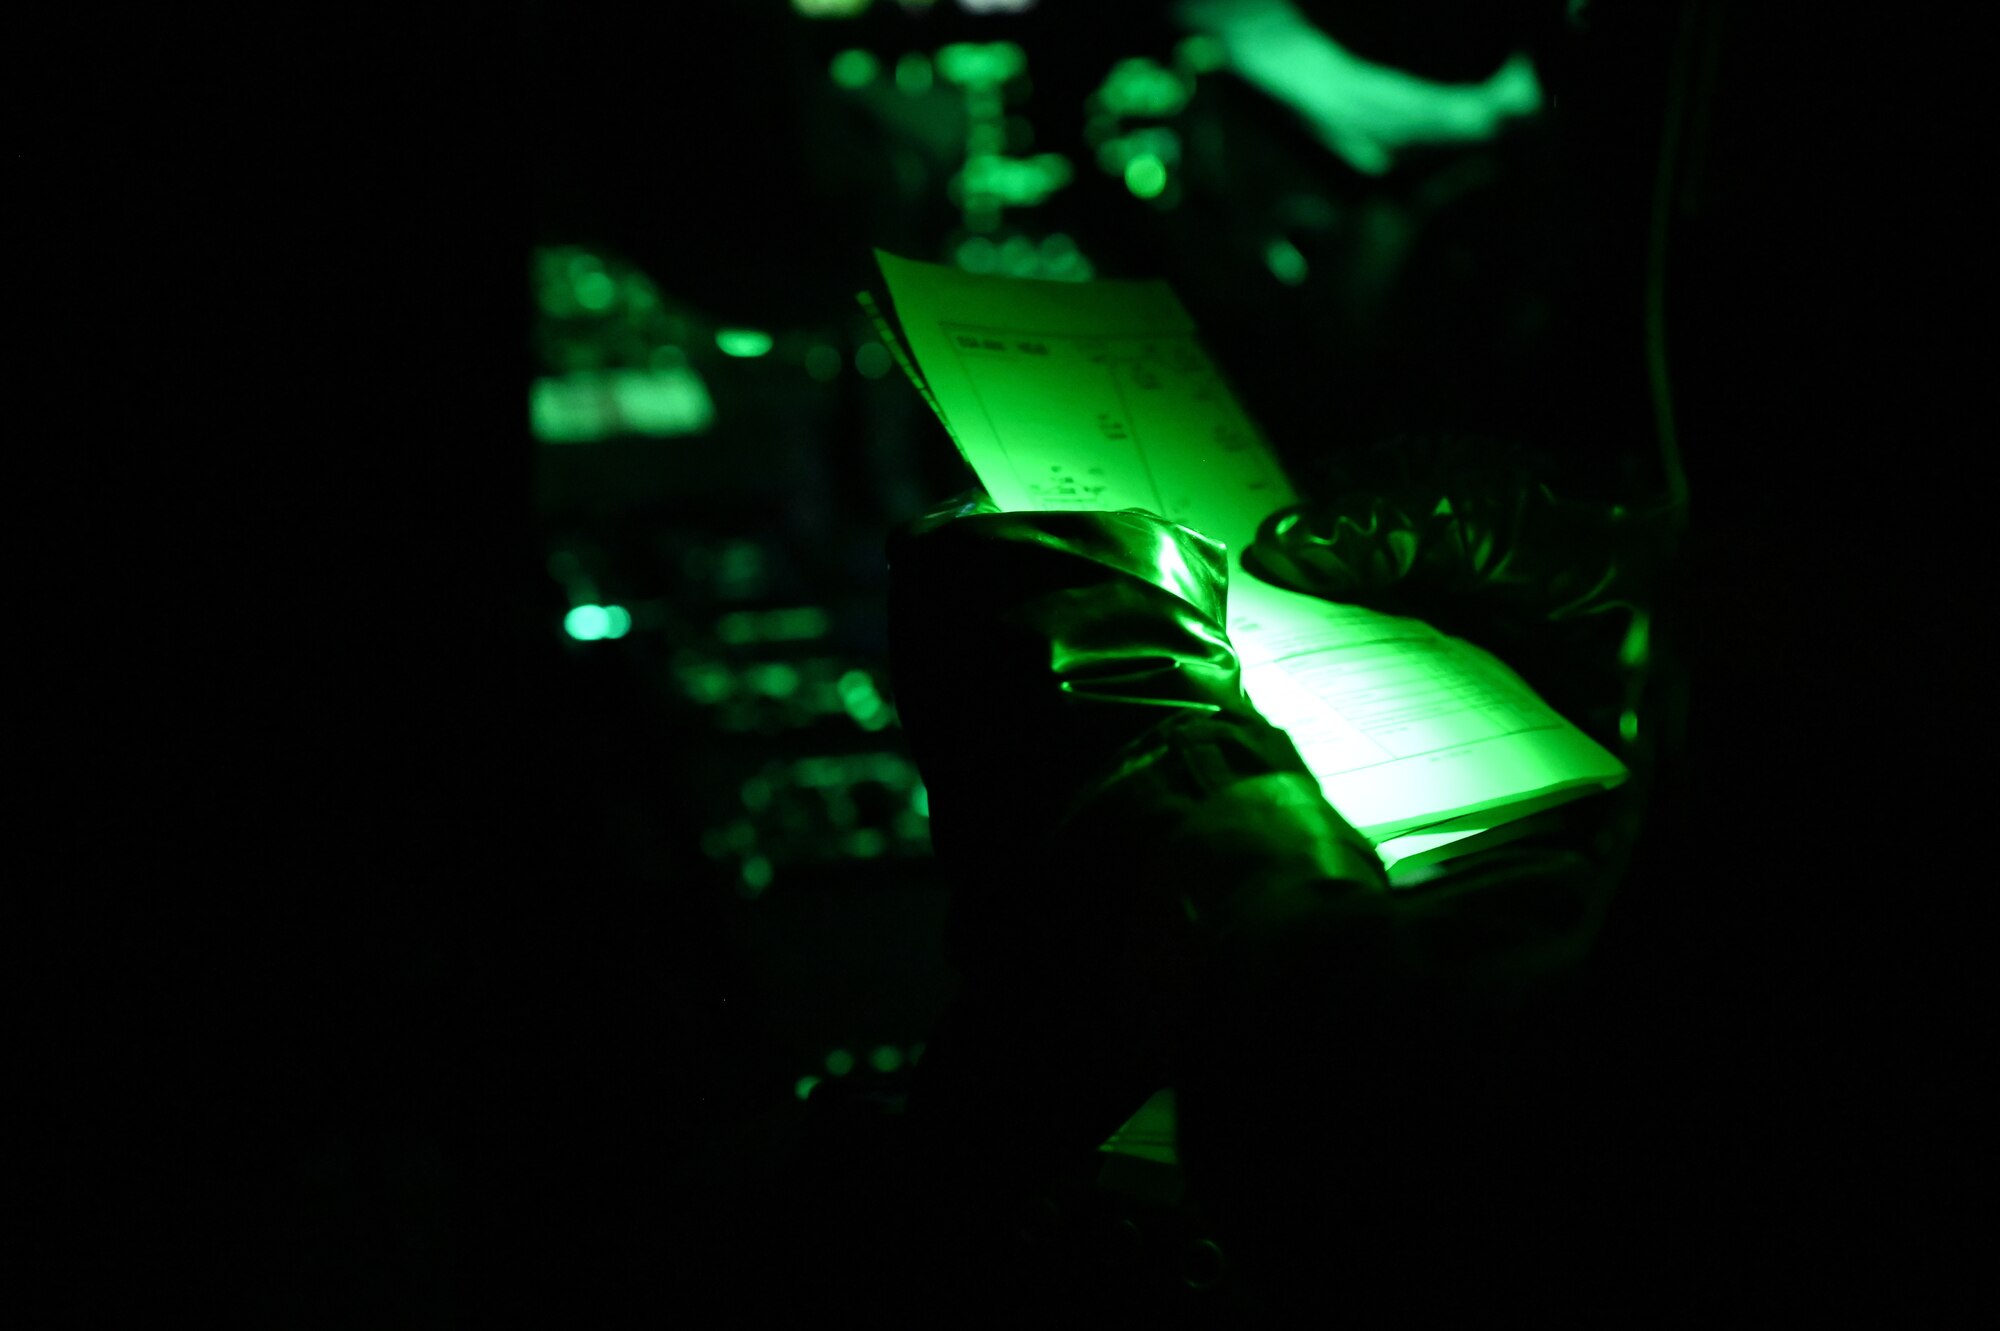 A pilot reads mission notes which are illuminated in green in the cockpit.